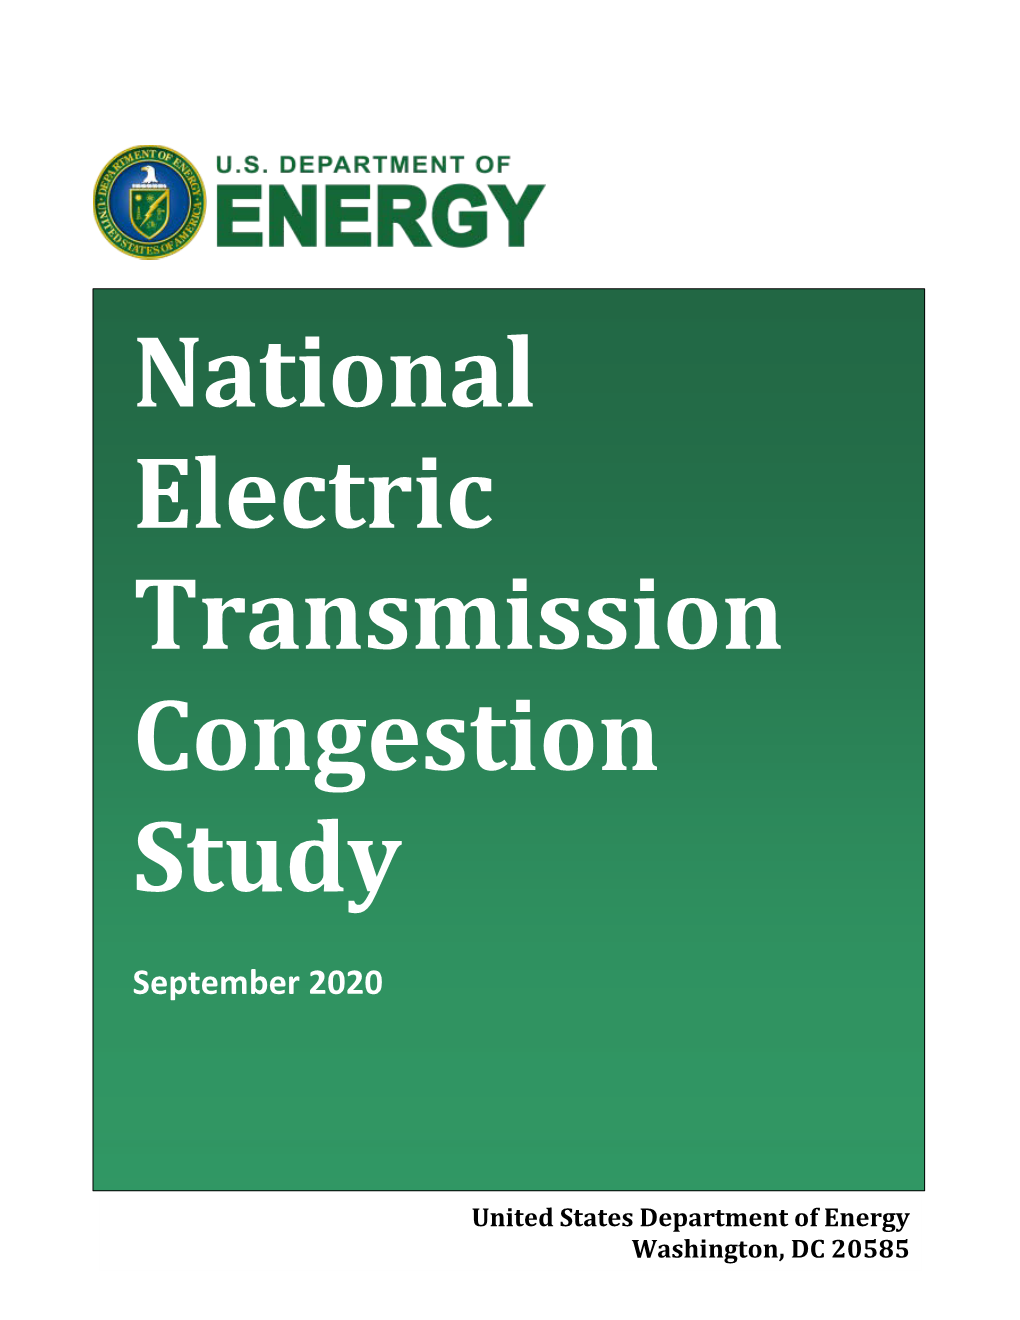 National Electric Transmission Congestion Study